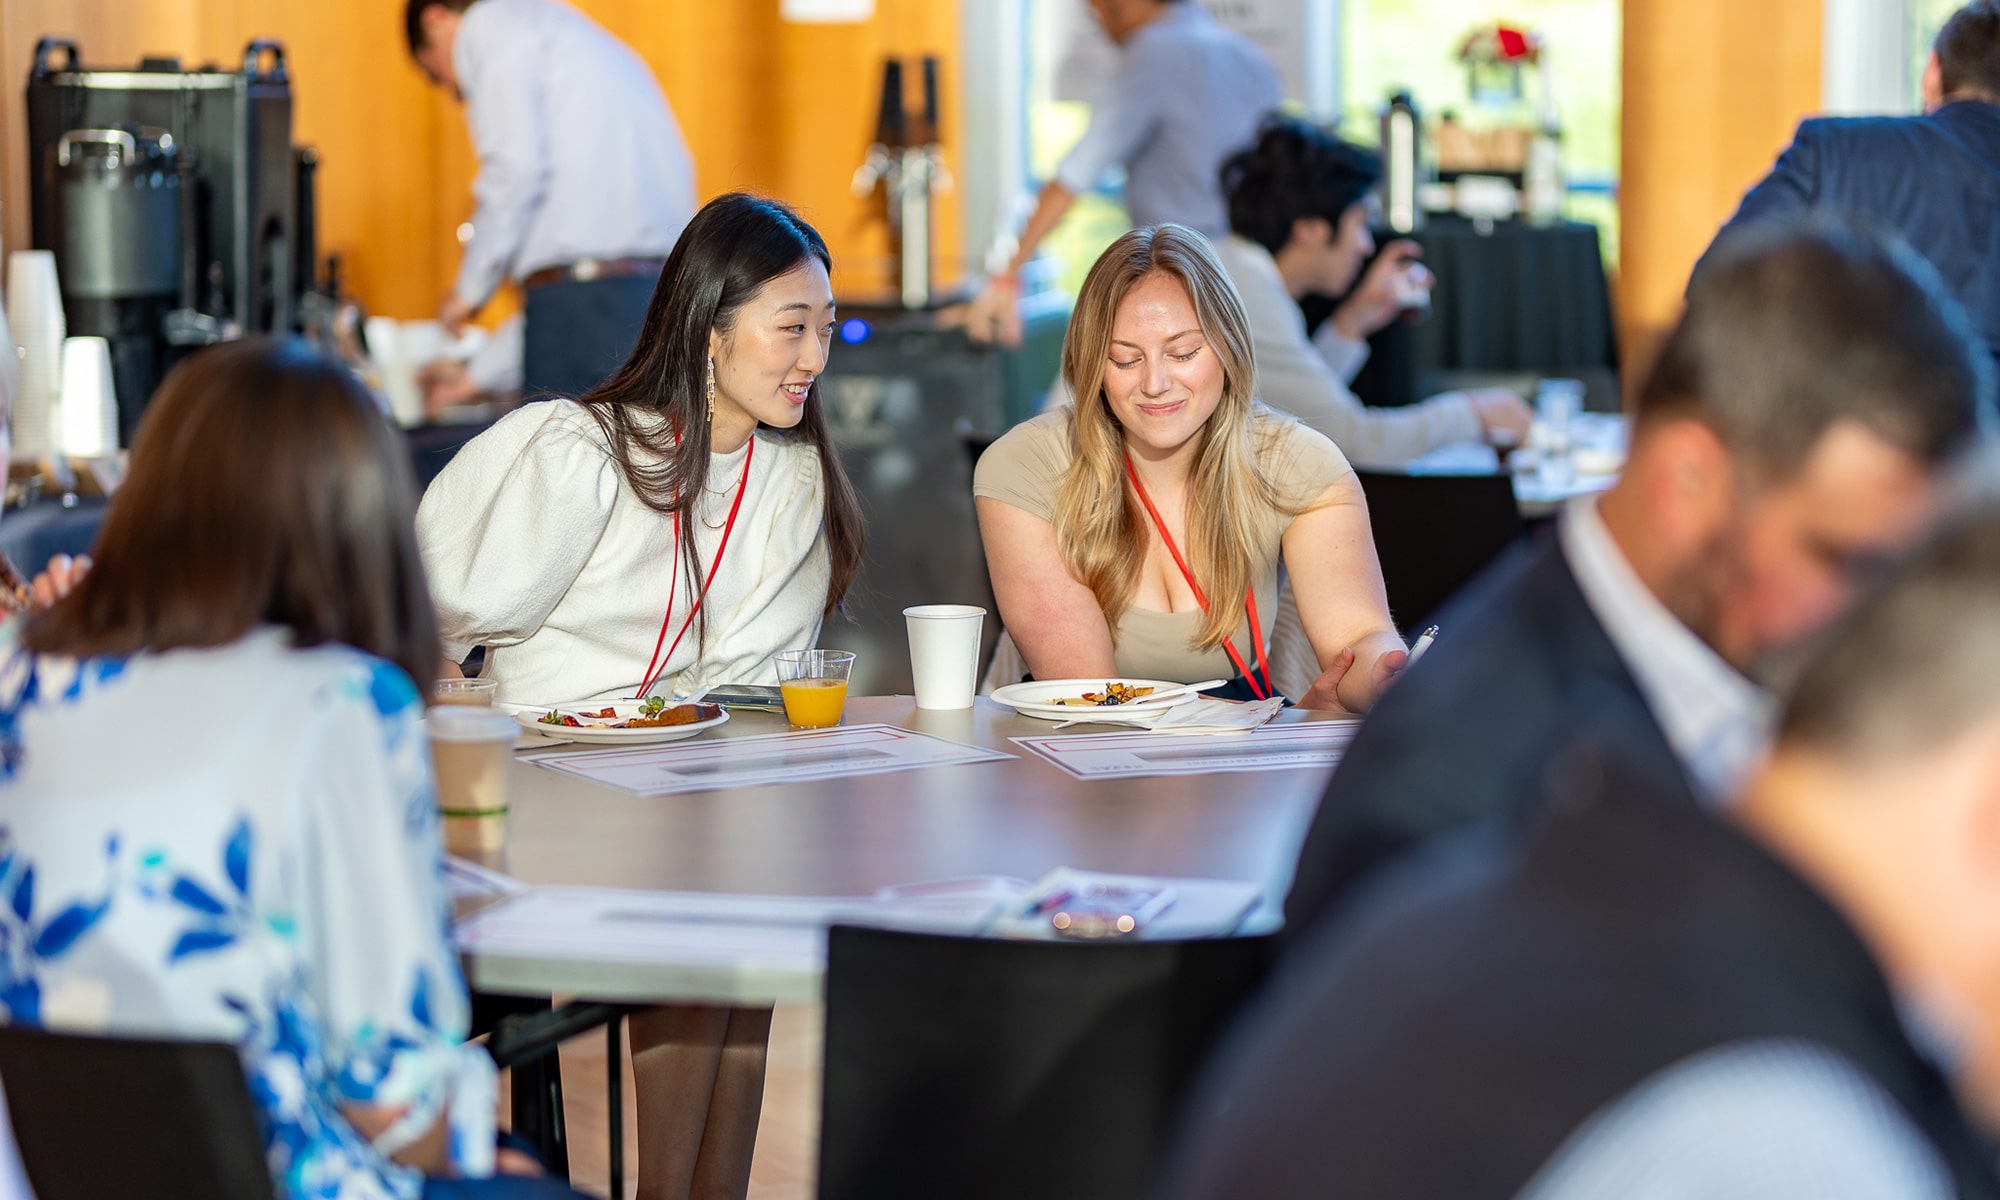 Two ReMix attendees share conversation at a table inside Knobel Hall